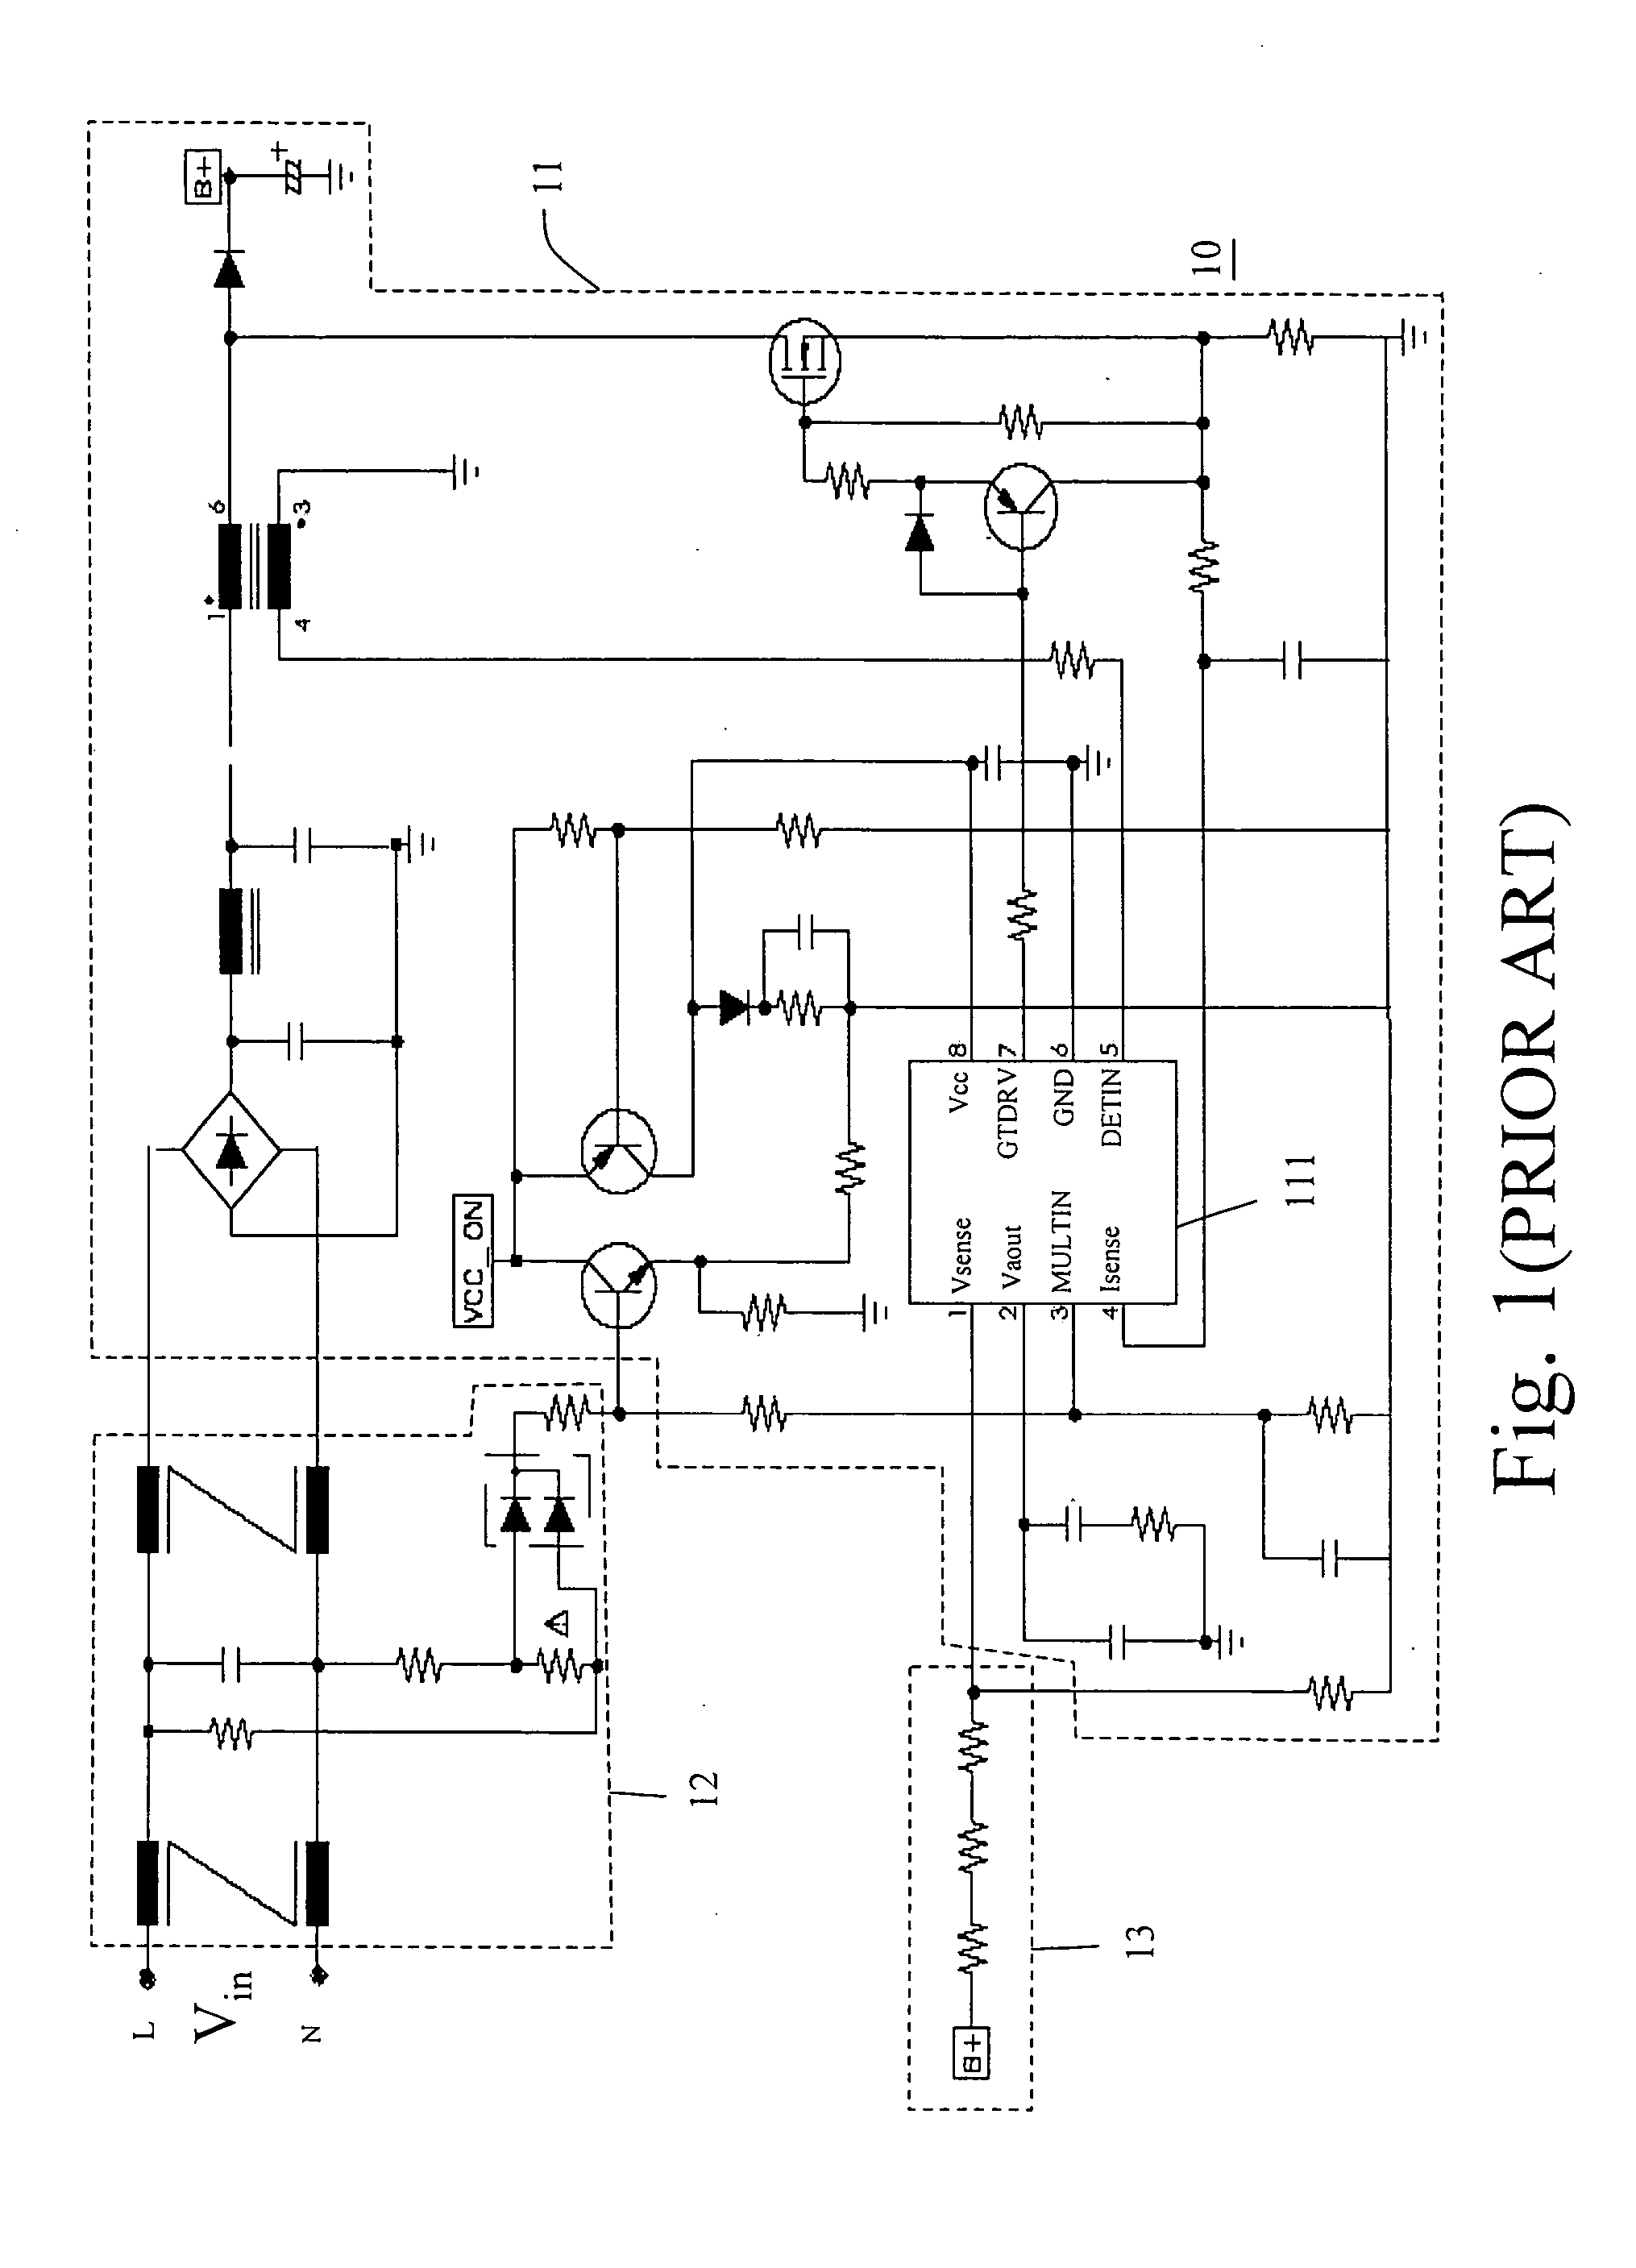 High-voltage detecting circuit for saving power in standby mode